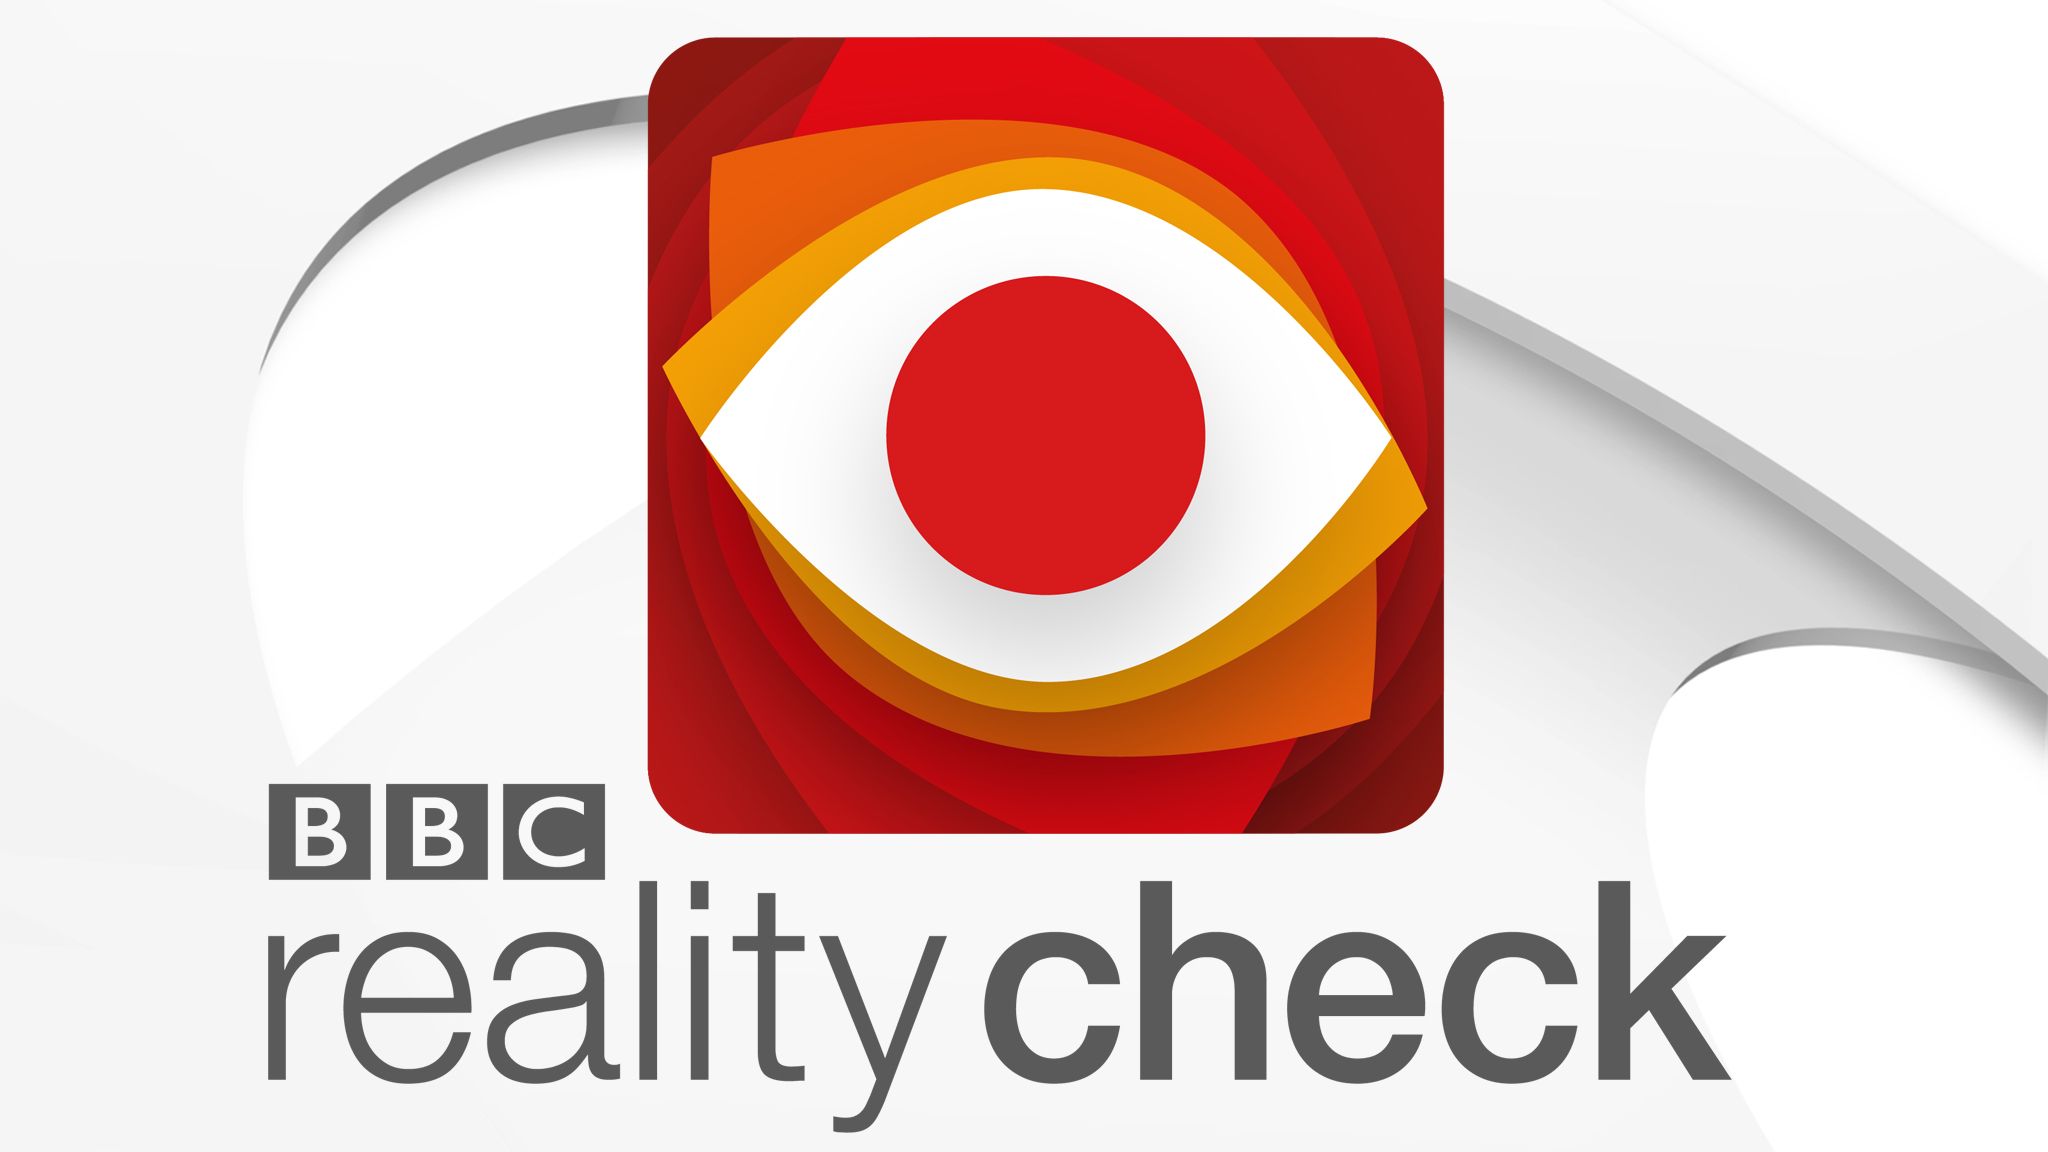 What claims do you want BBC Reality Check to investigate? 